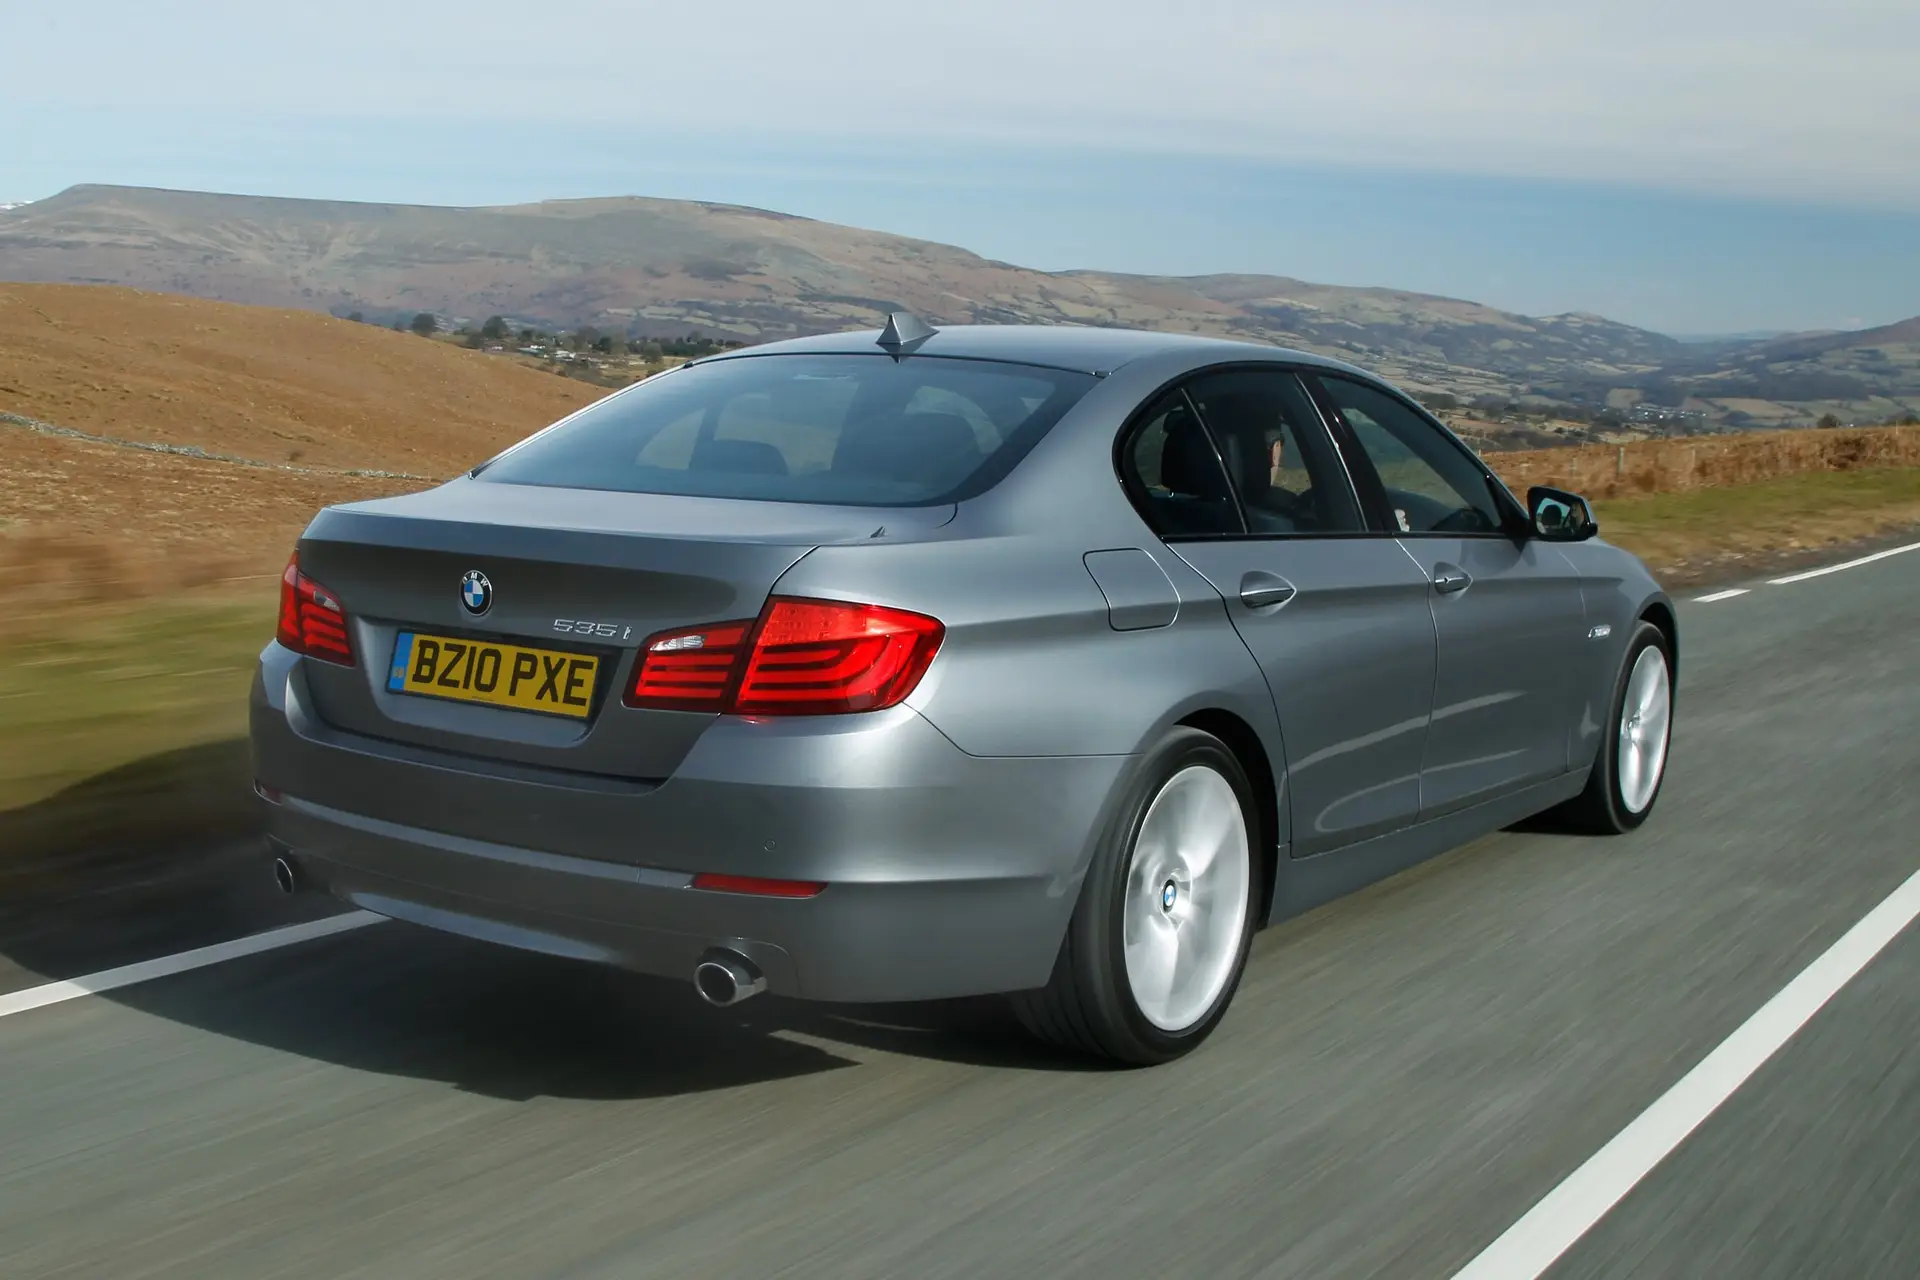 BMW 5 Series (2010-2017) Review: Exterior rear three quarter photo of the BMW 5 Series on the road